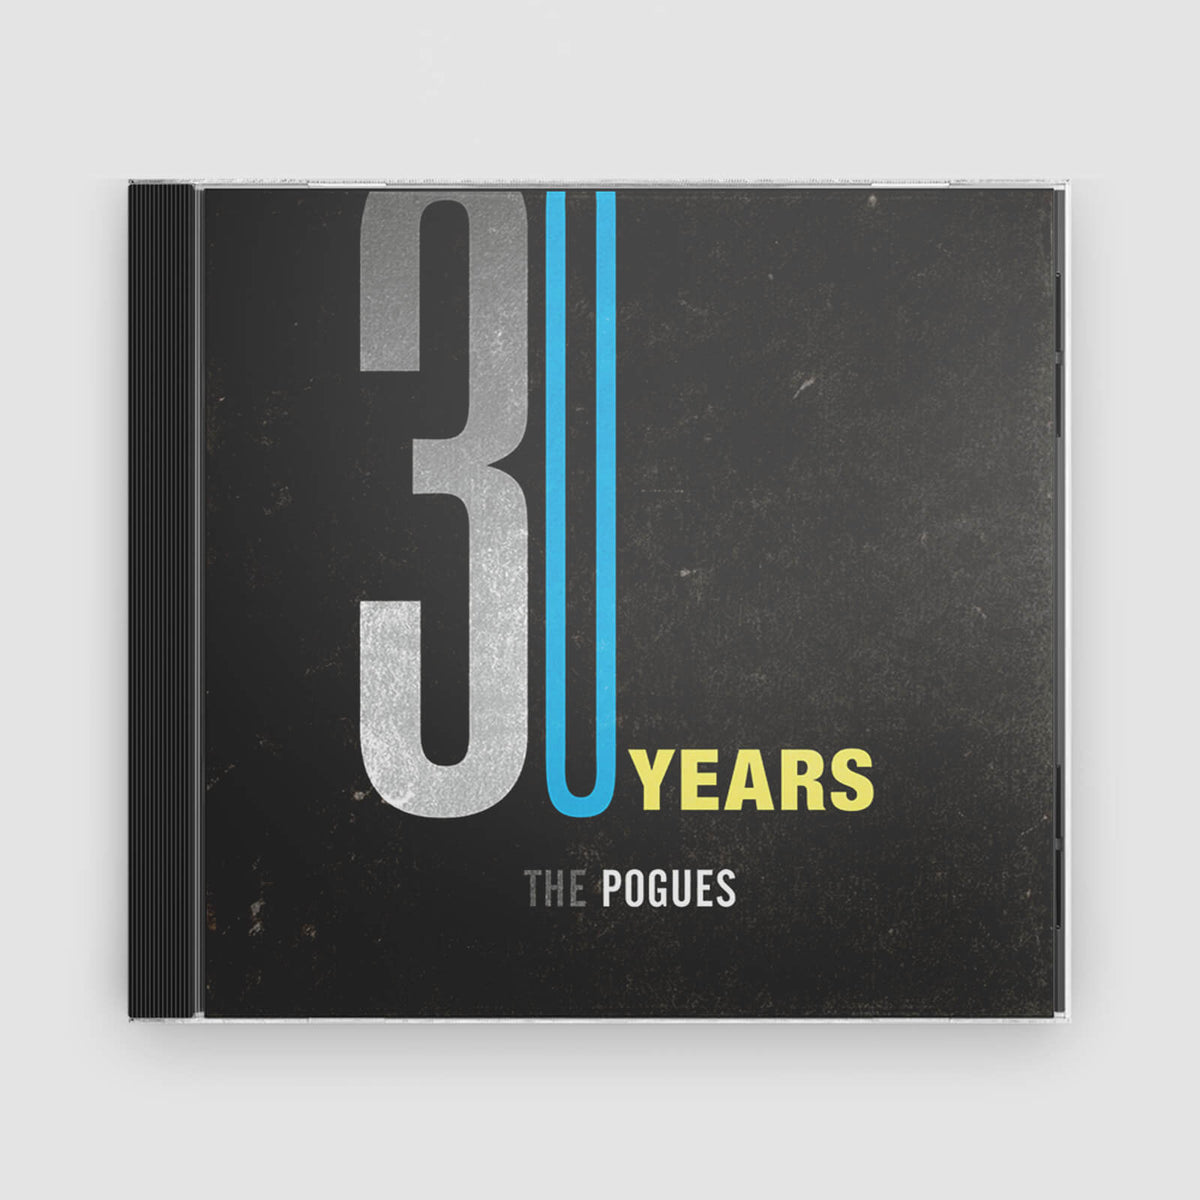 The Pogues : 30 Years